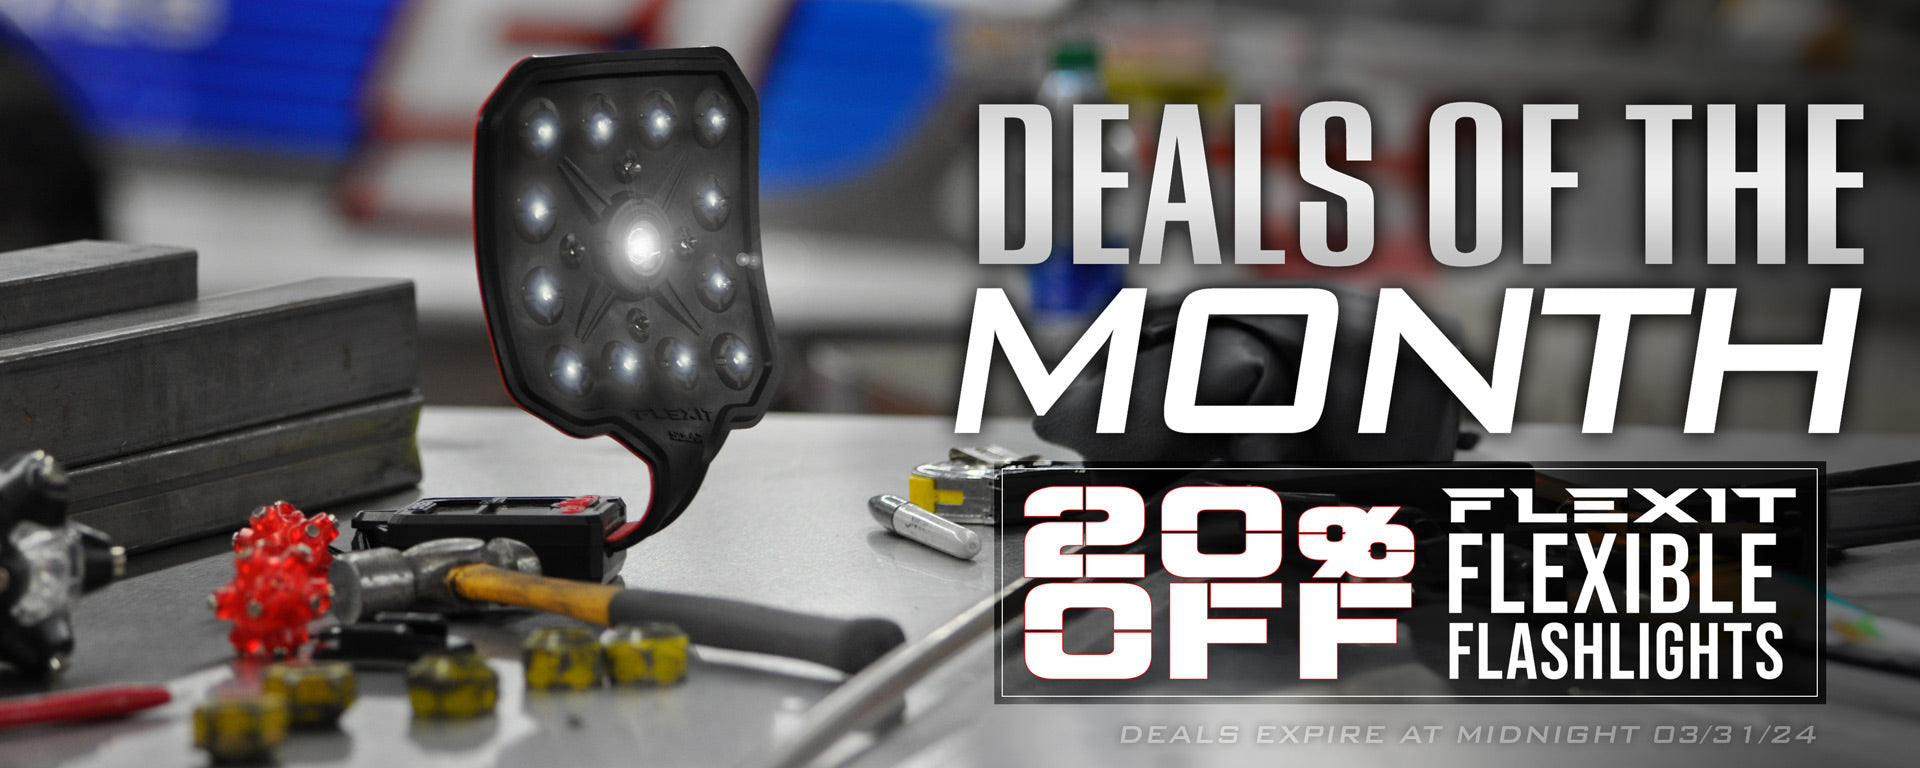 March deals of the month banner. 20% off FLEXIT Flexible Flashlights